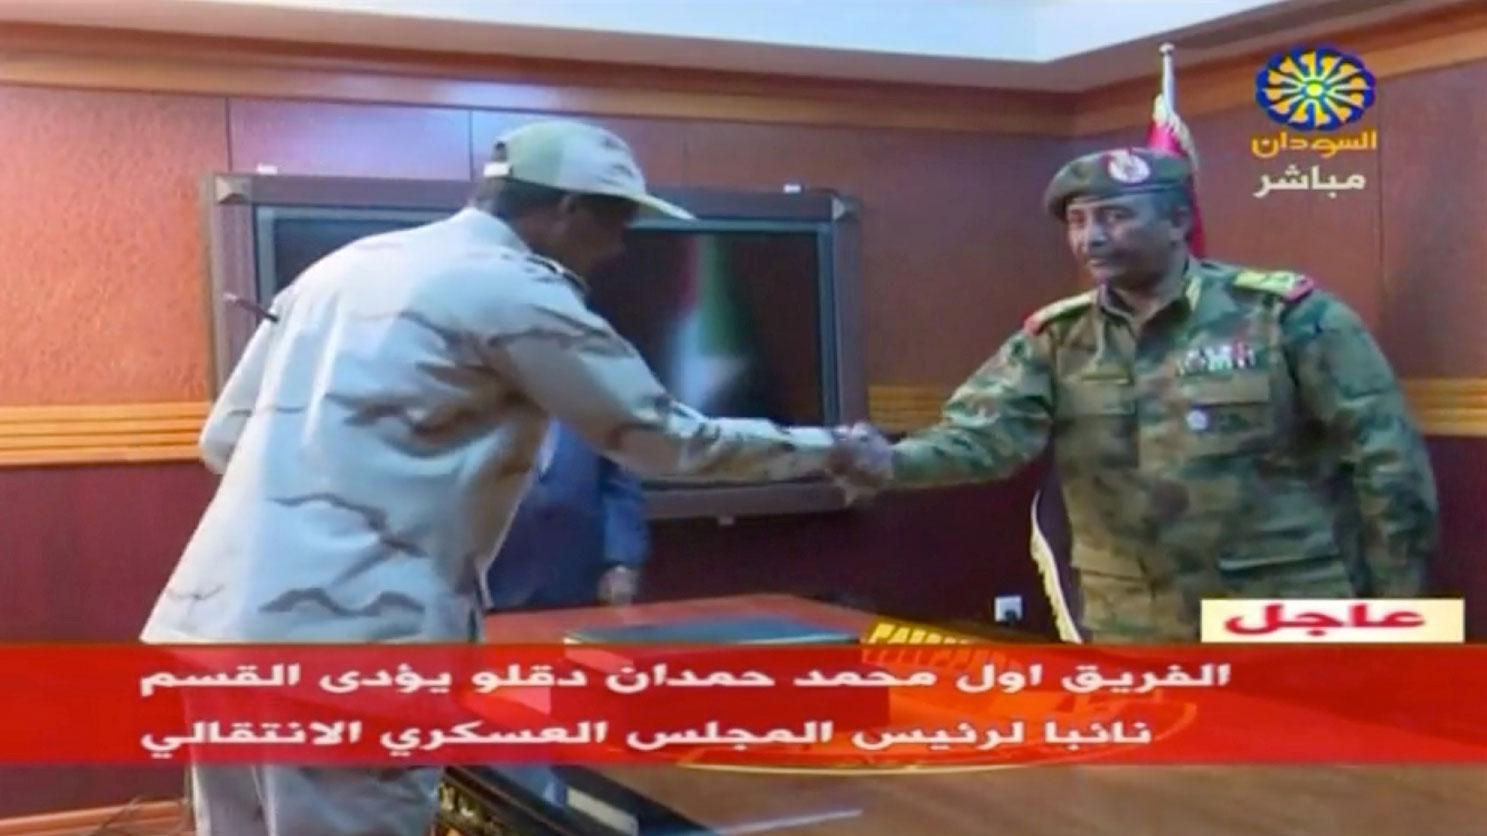 Sudan's General Abdelfattah Mohamed Hamdan Dagalo, head of the Rapid Support Forces, is sworn in as deputy head of Sudan's Transitional Military Council